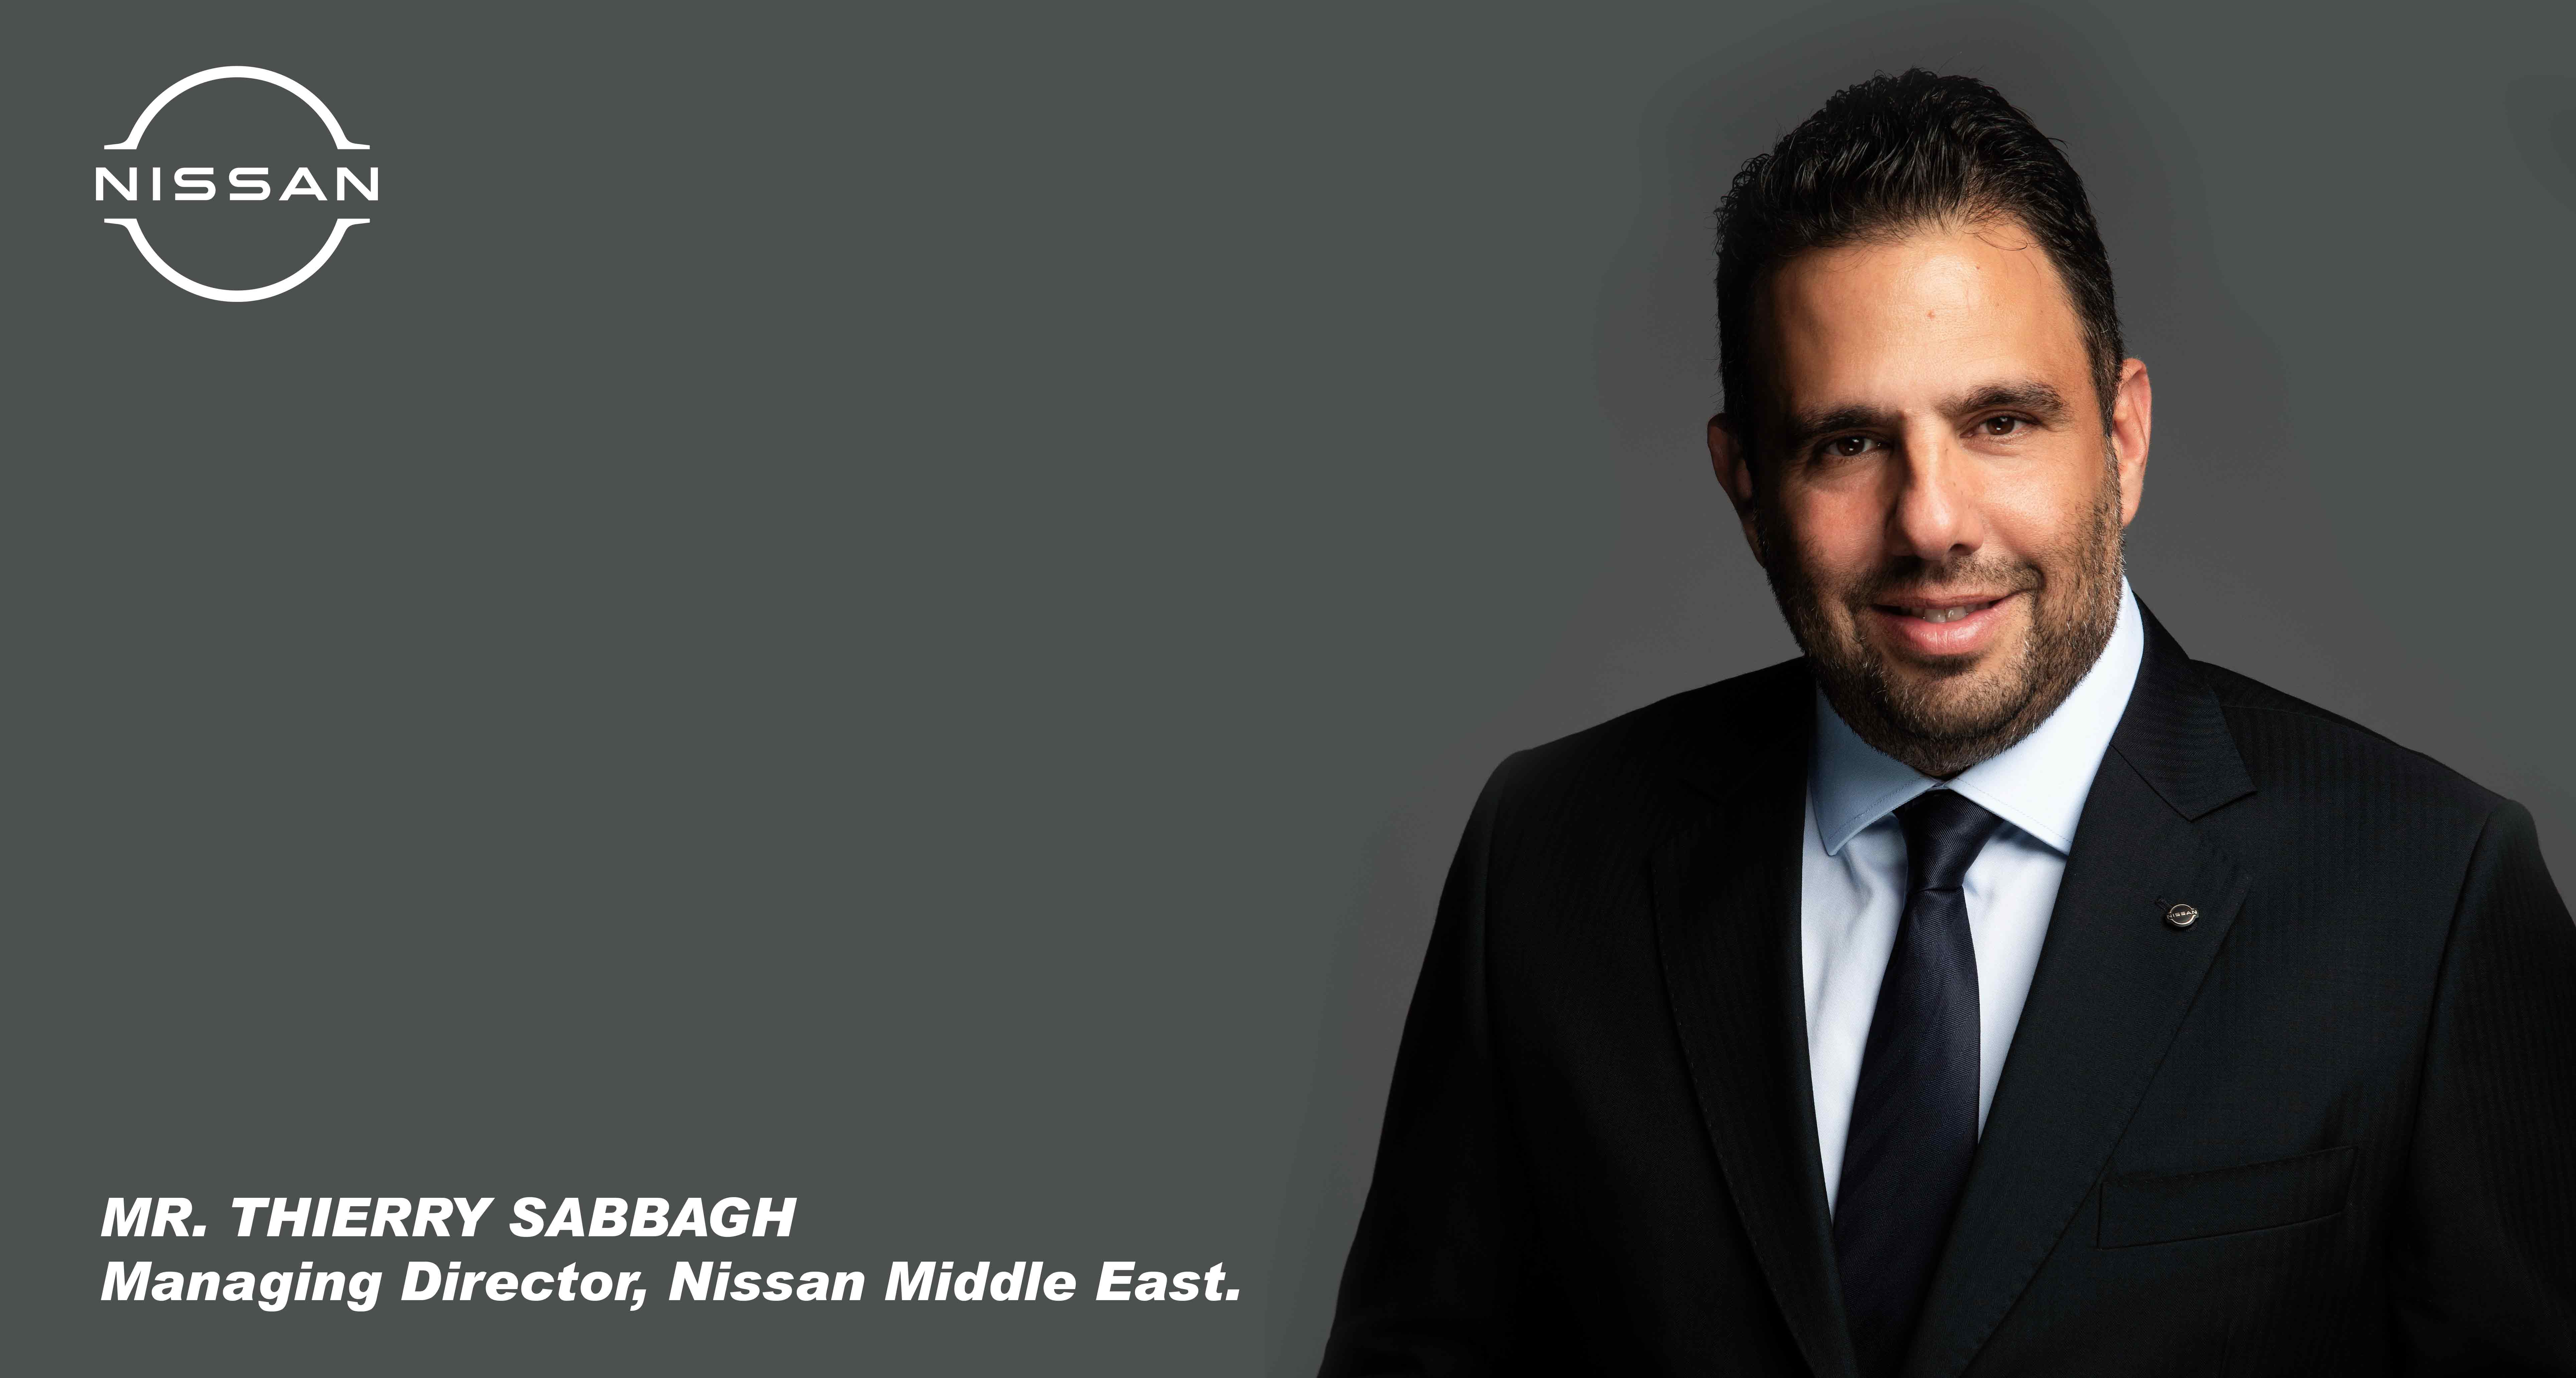 Interview with Mr. Thierry Sabbagh, Managing Director, Nissan Middle East